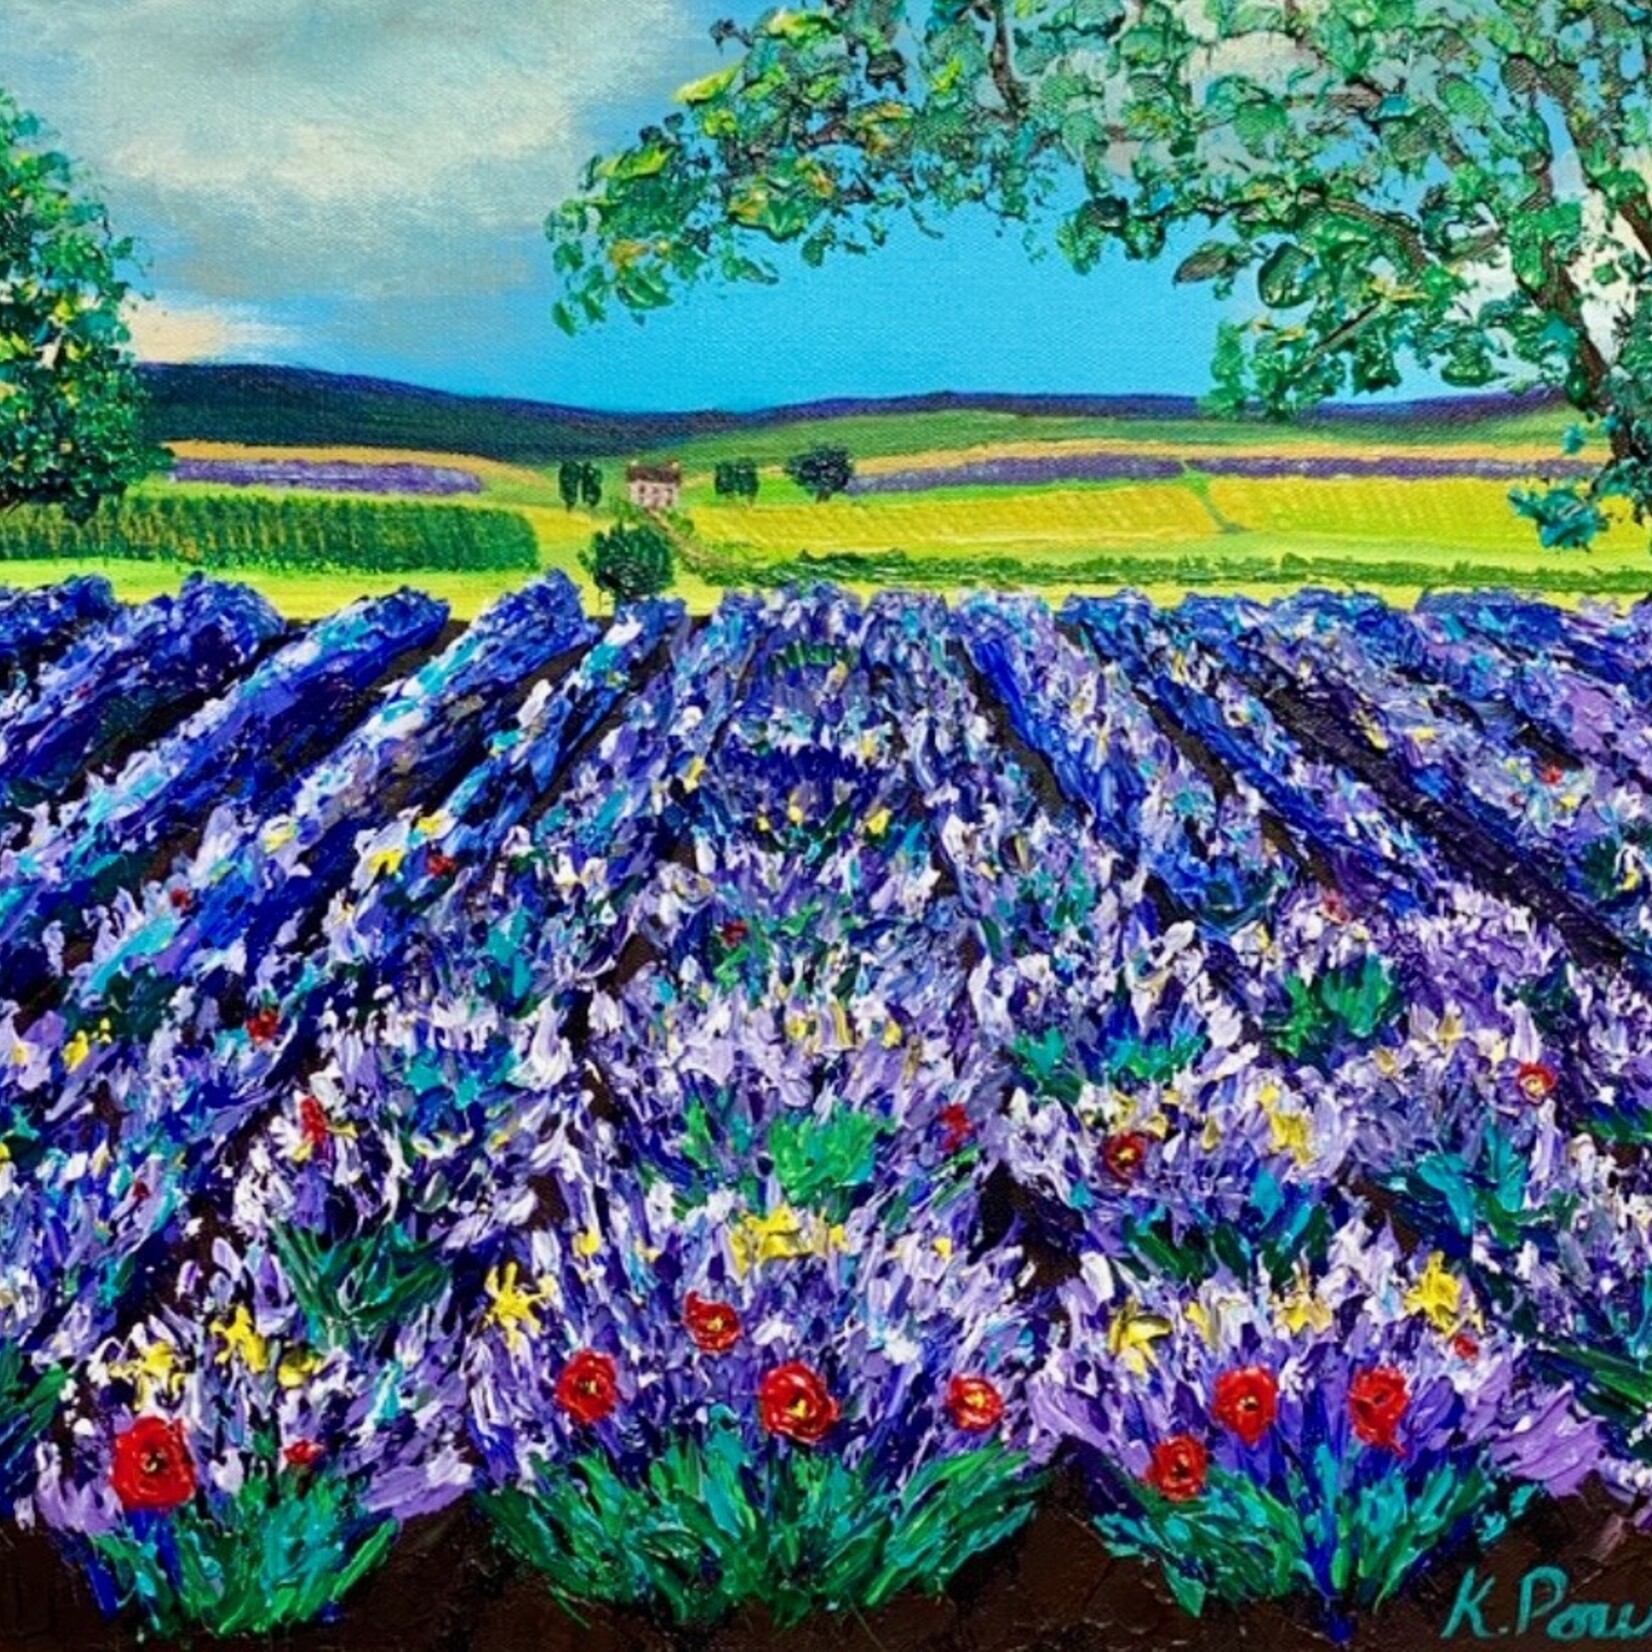 Kelly Pounds "Lavender Fields Forever", orig acrylic on GW canvas, 20x16", KELP